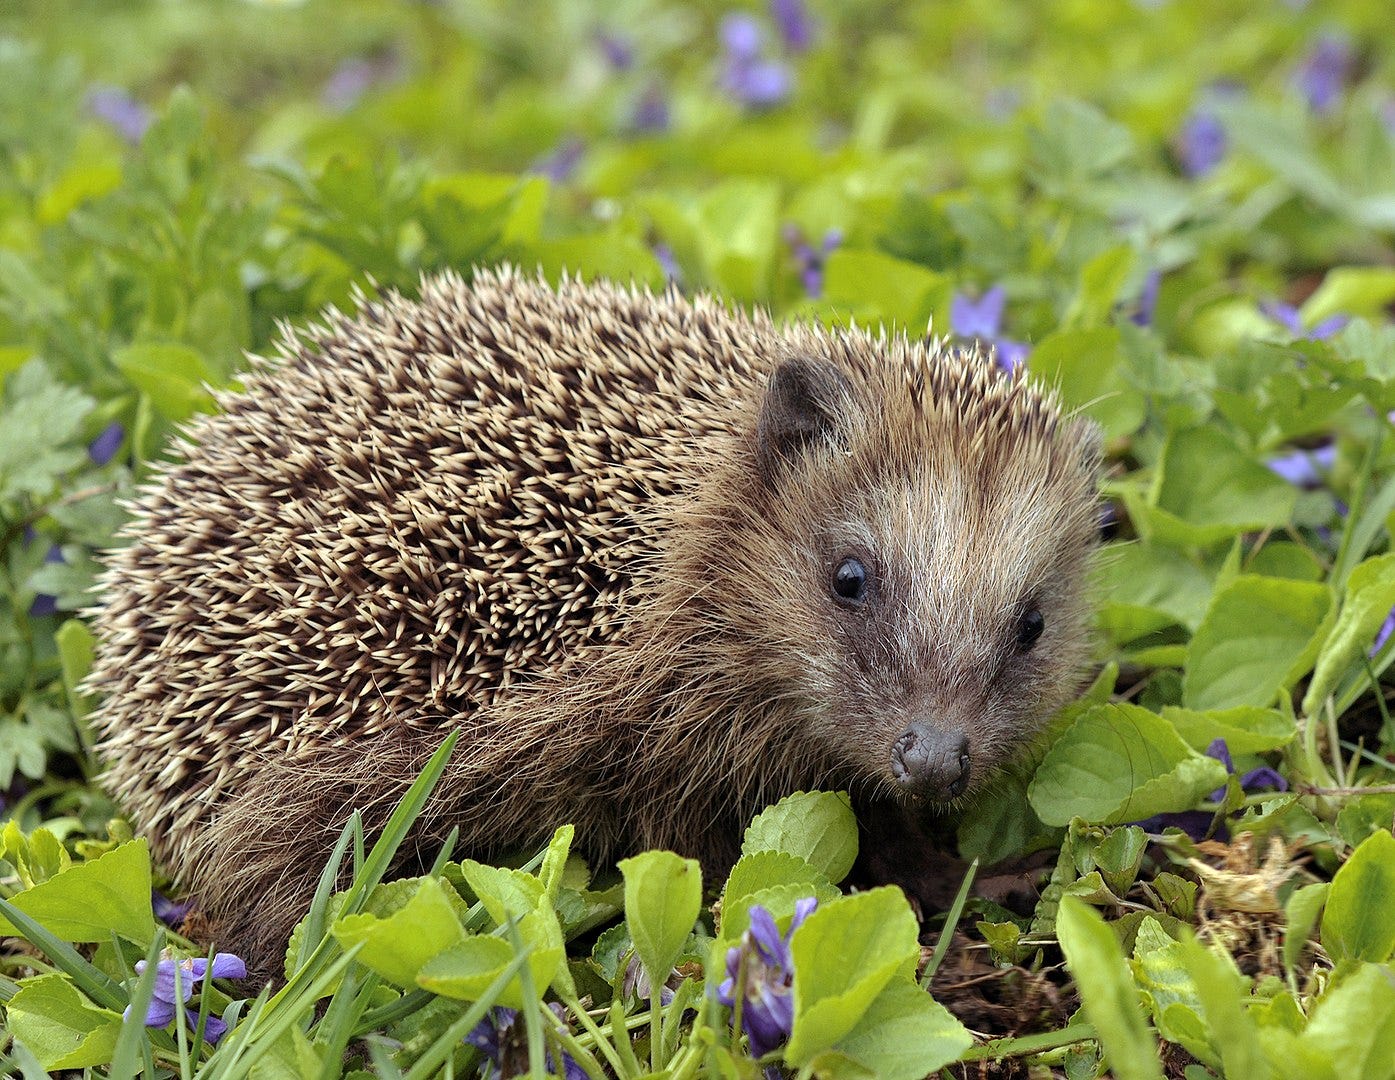 European hedgehog, By Michael Gäbler, CC BY-SA 3.0, https://commons.wikimedia.org/w/index.php?curid=25702847